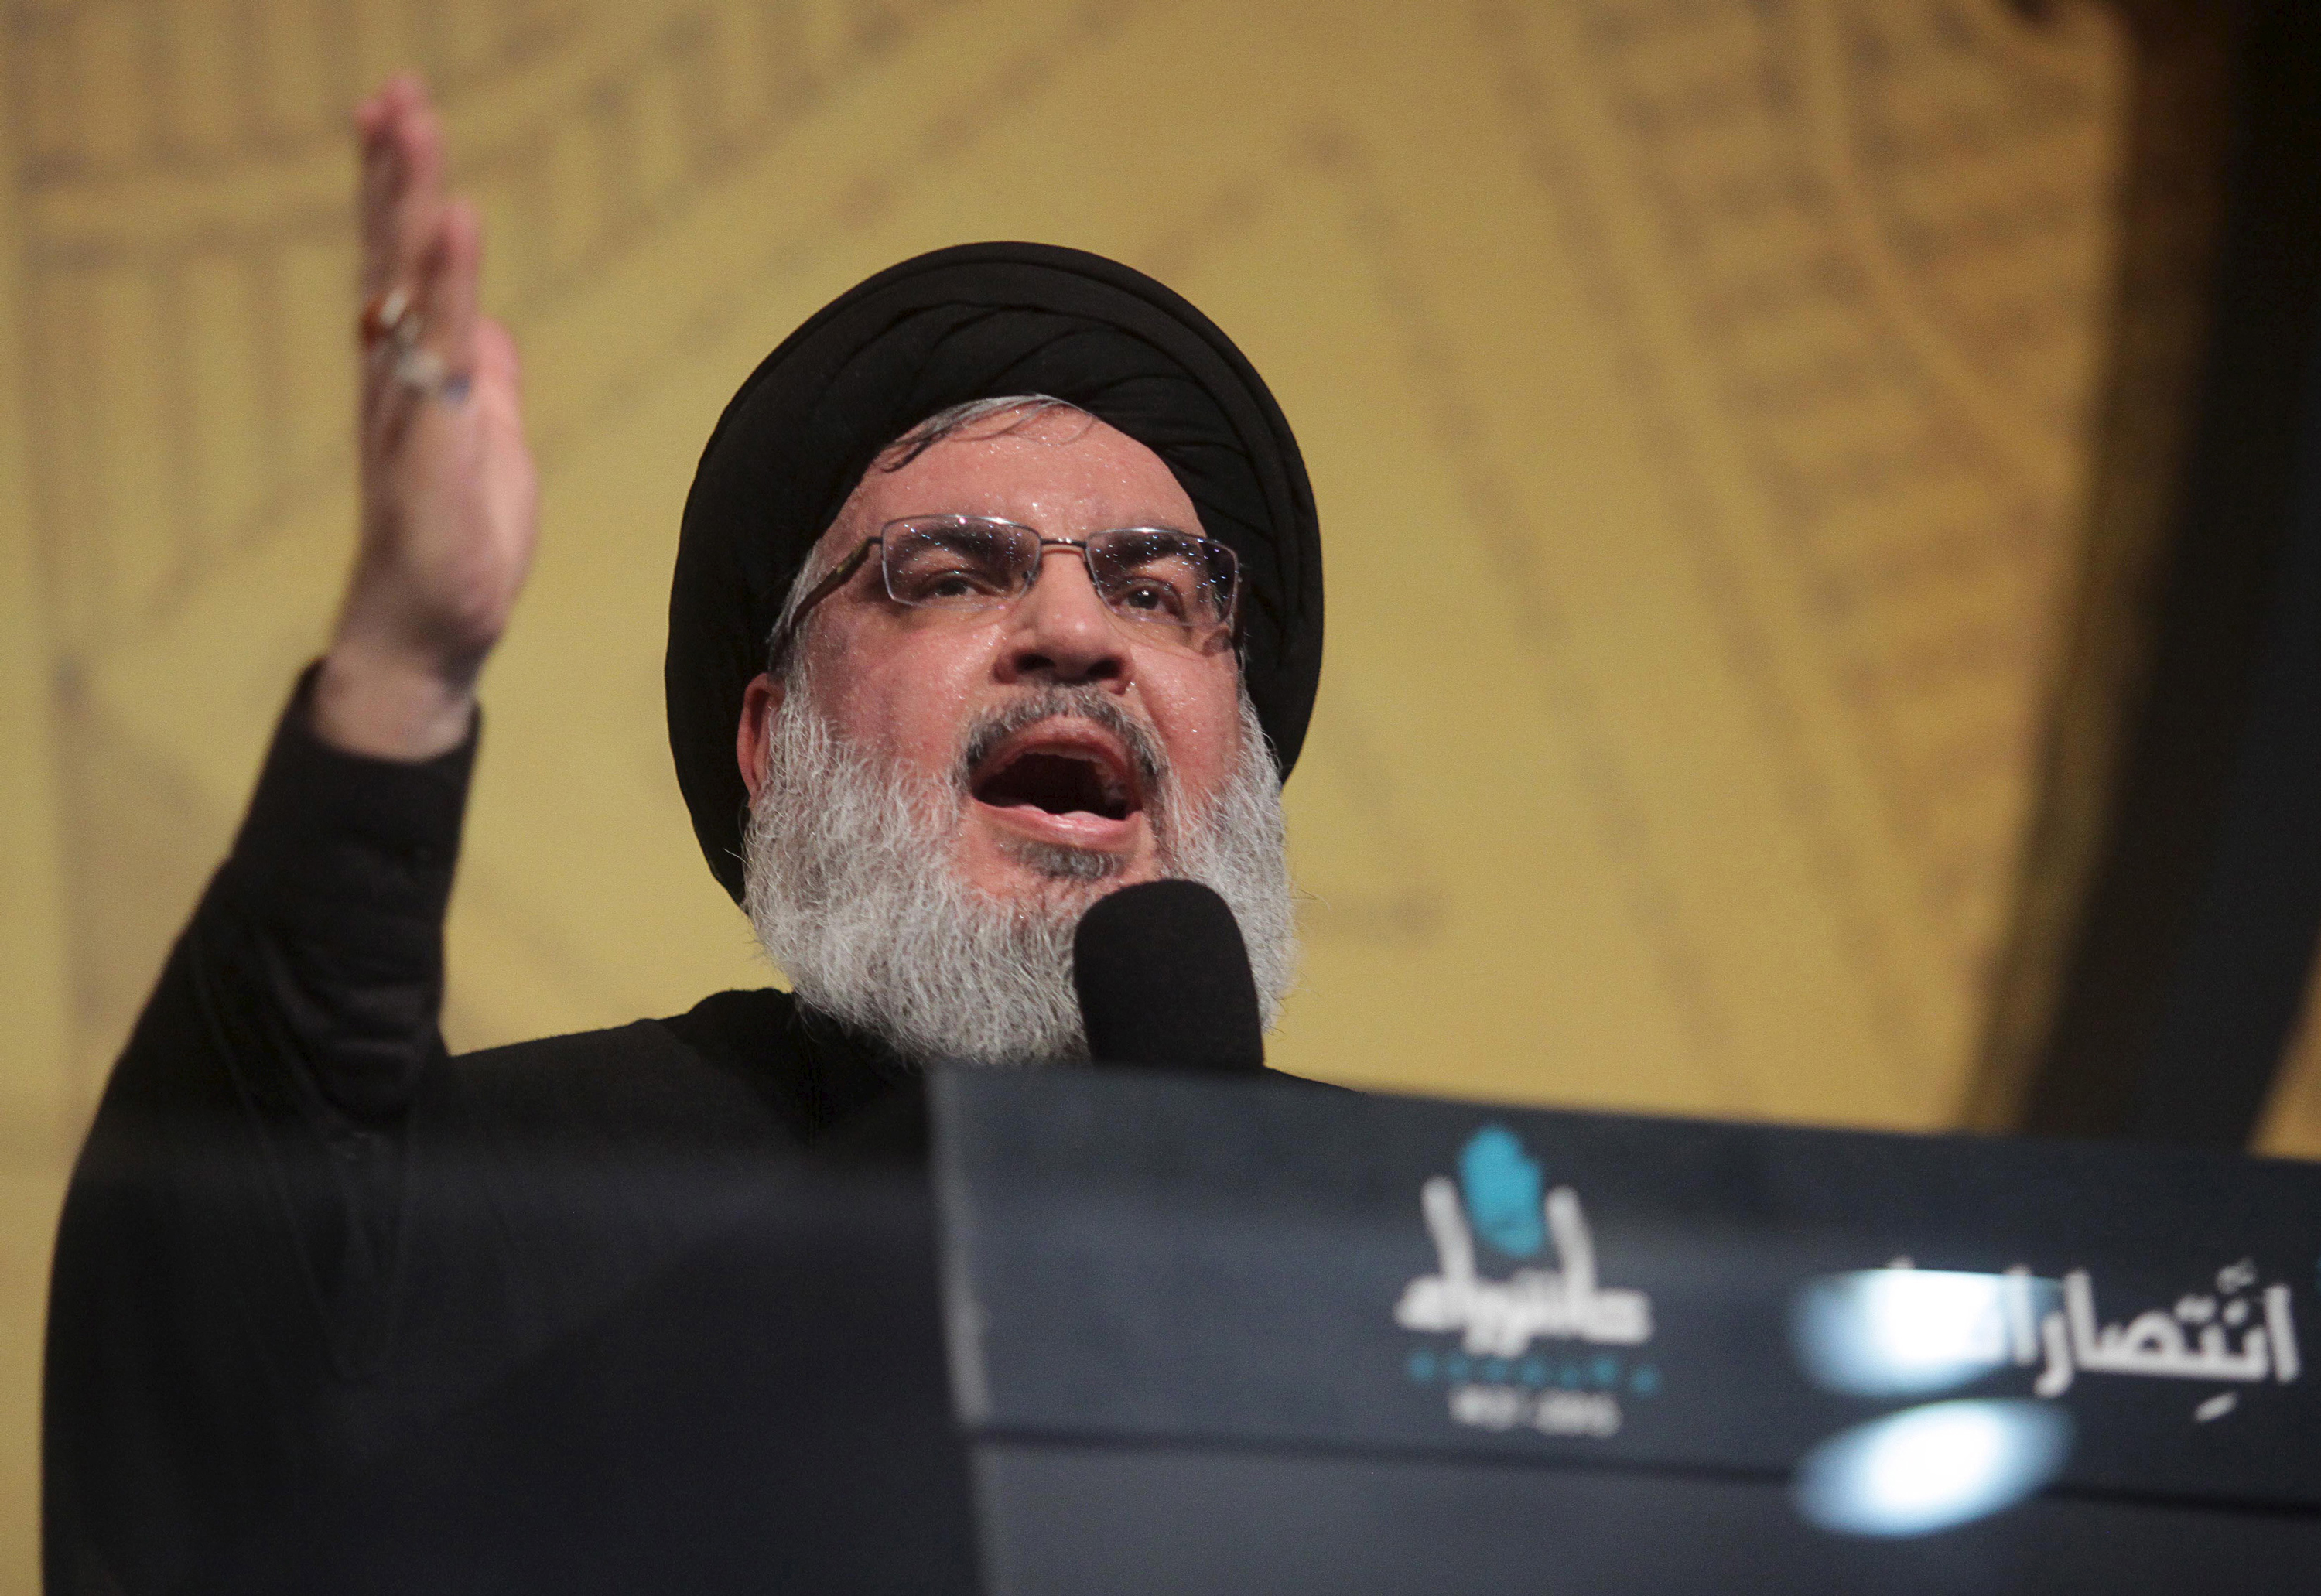 Hassan Nasrallah gestures as he addresses his supporters at an Ashura ceremony in Beirut's southern suburbs, Lebanon on October 23, 2015.